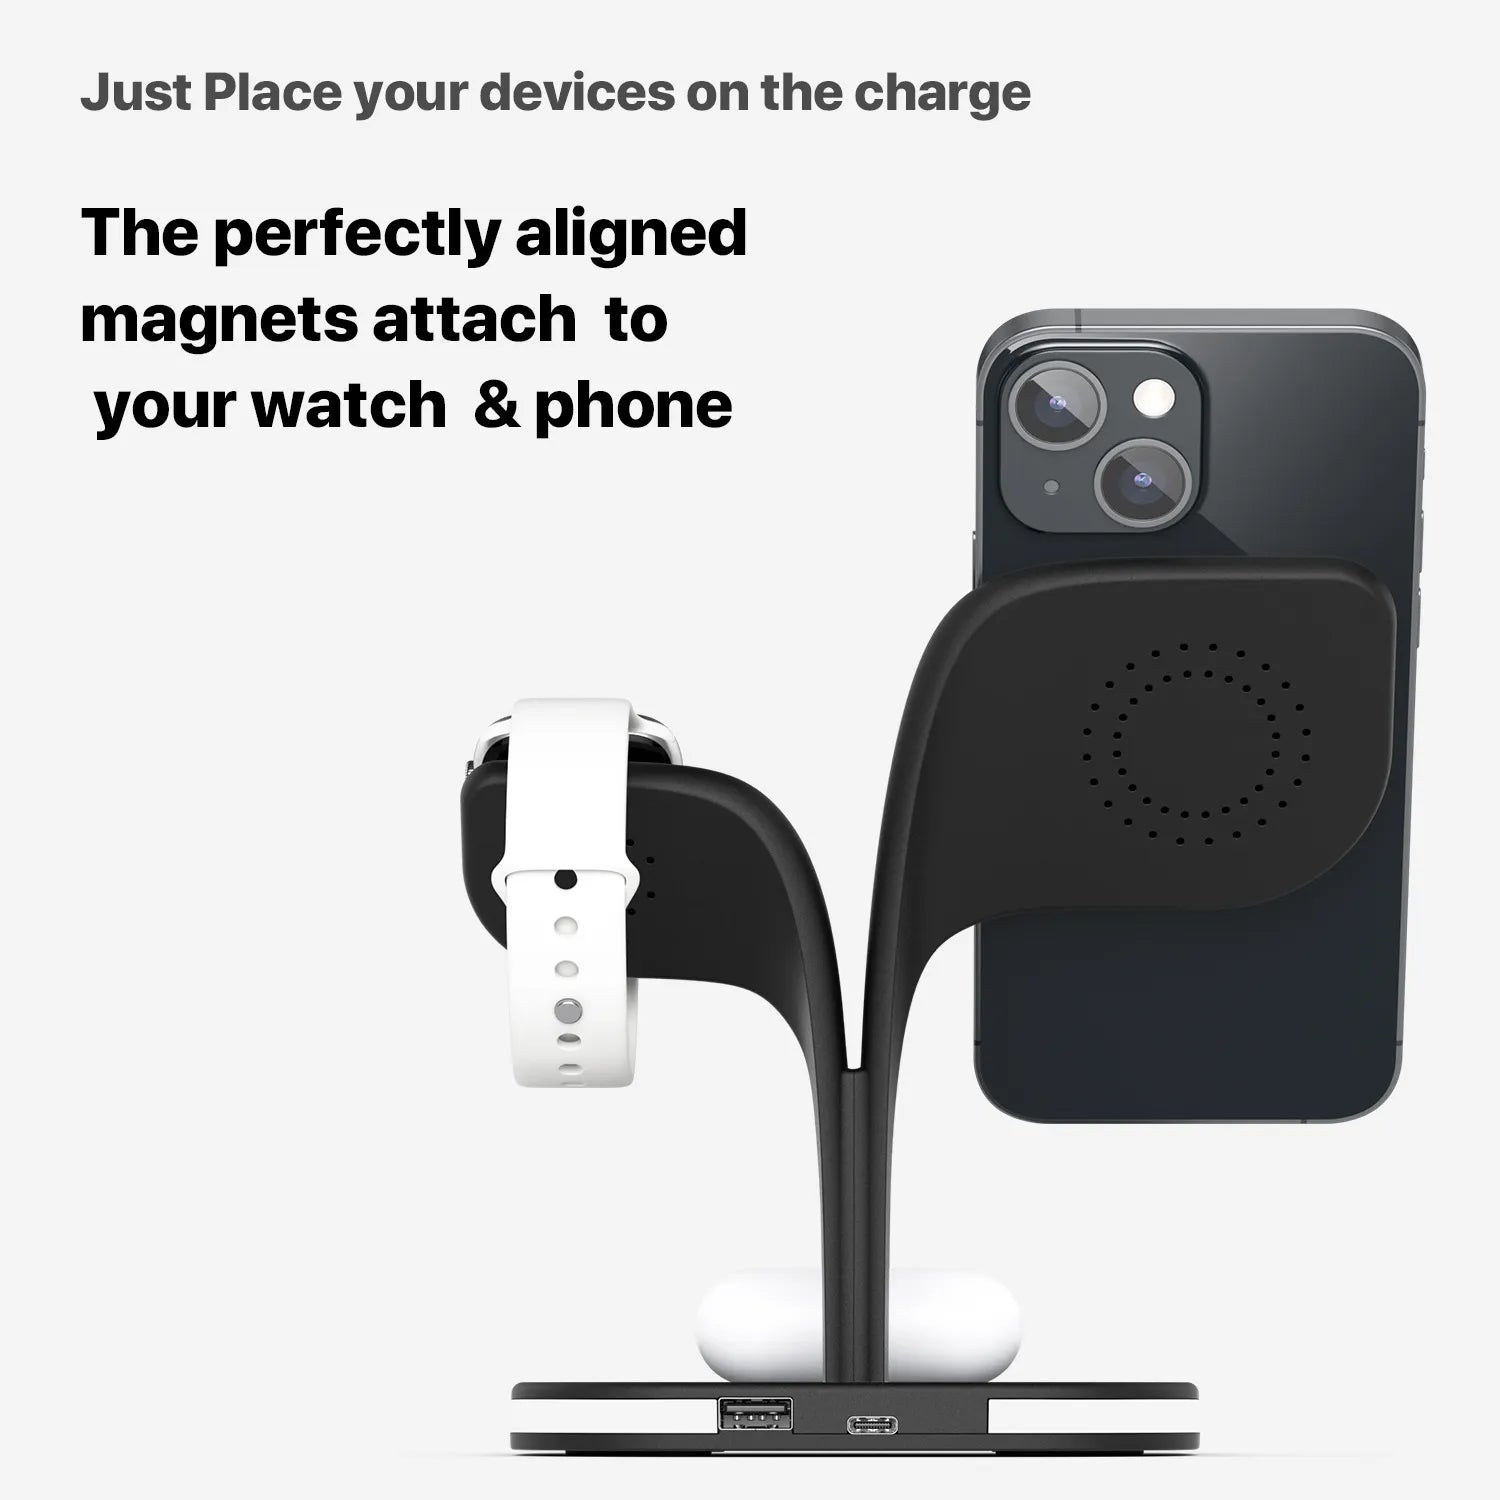 The perfectly aligned magnets attach to your watch & phone